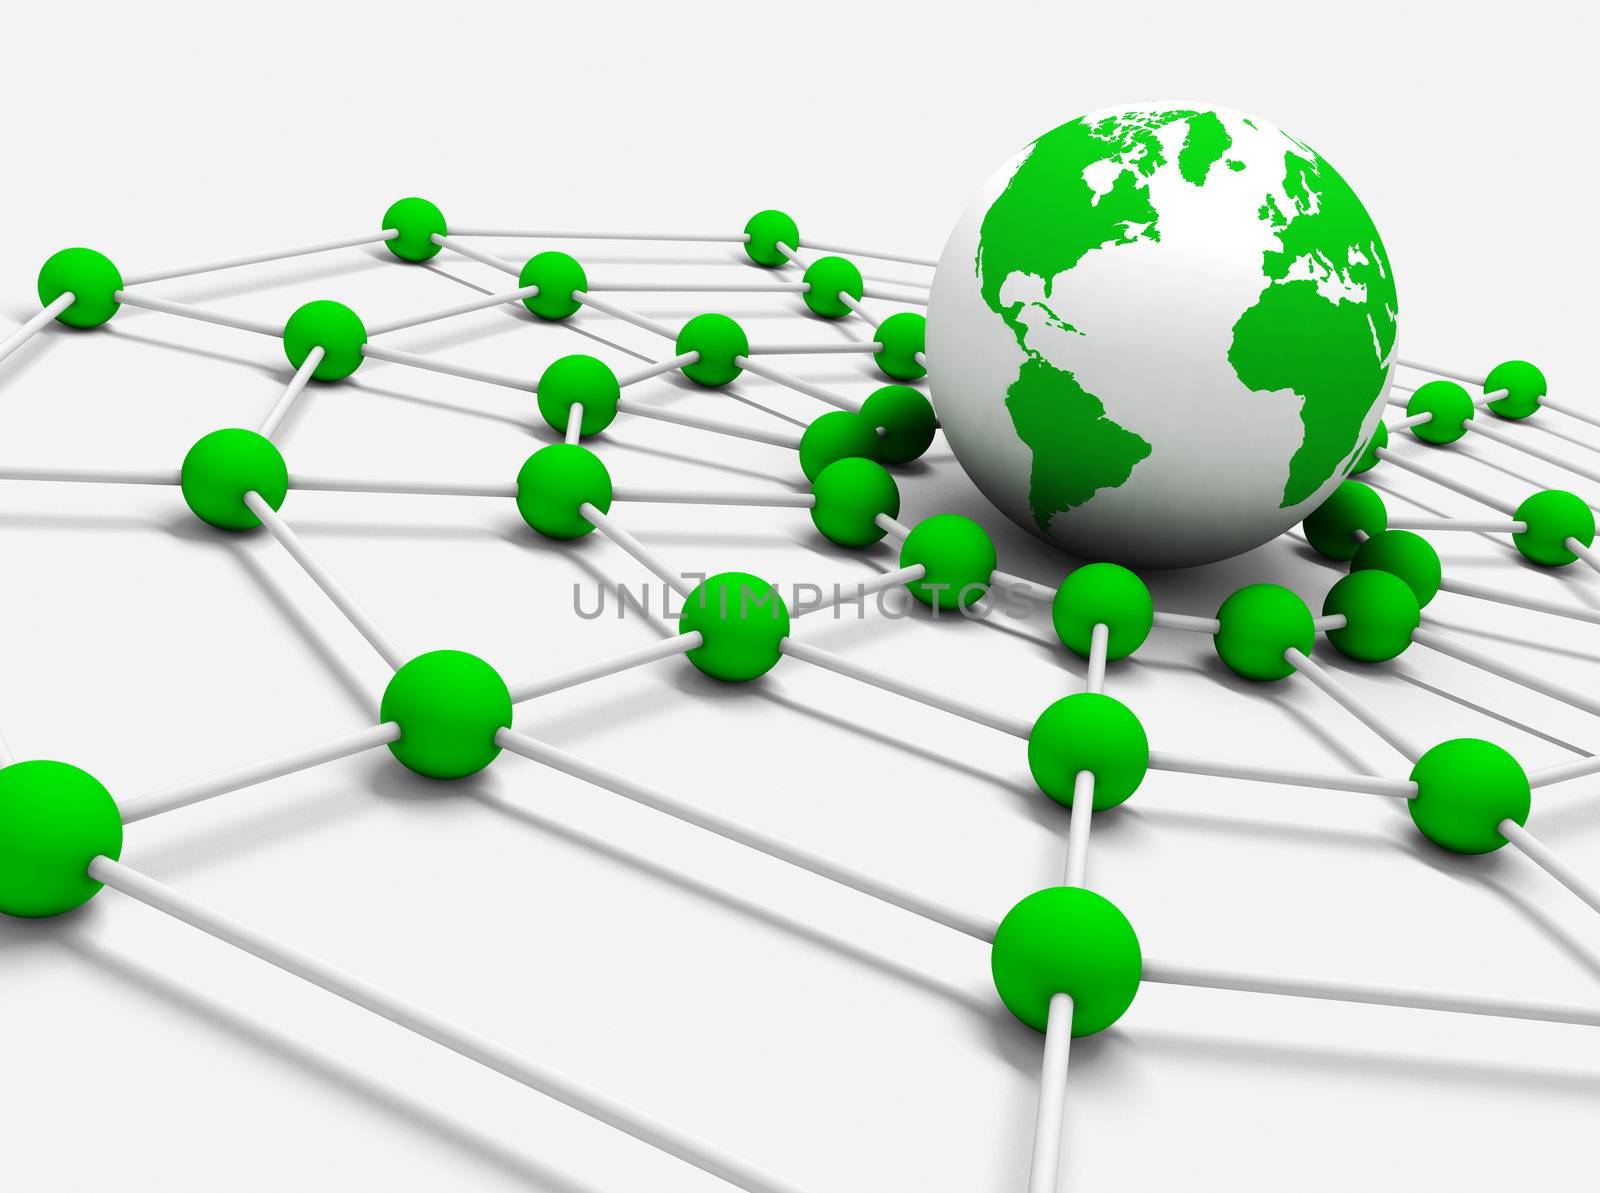 Concept of internet and networking with globe world map